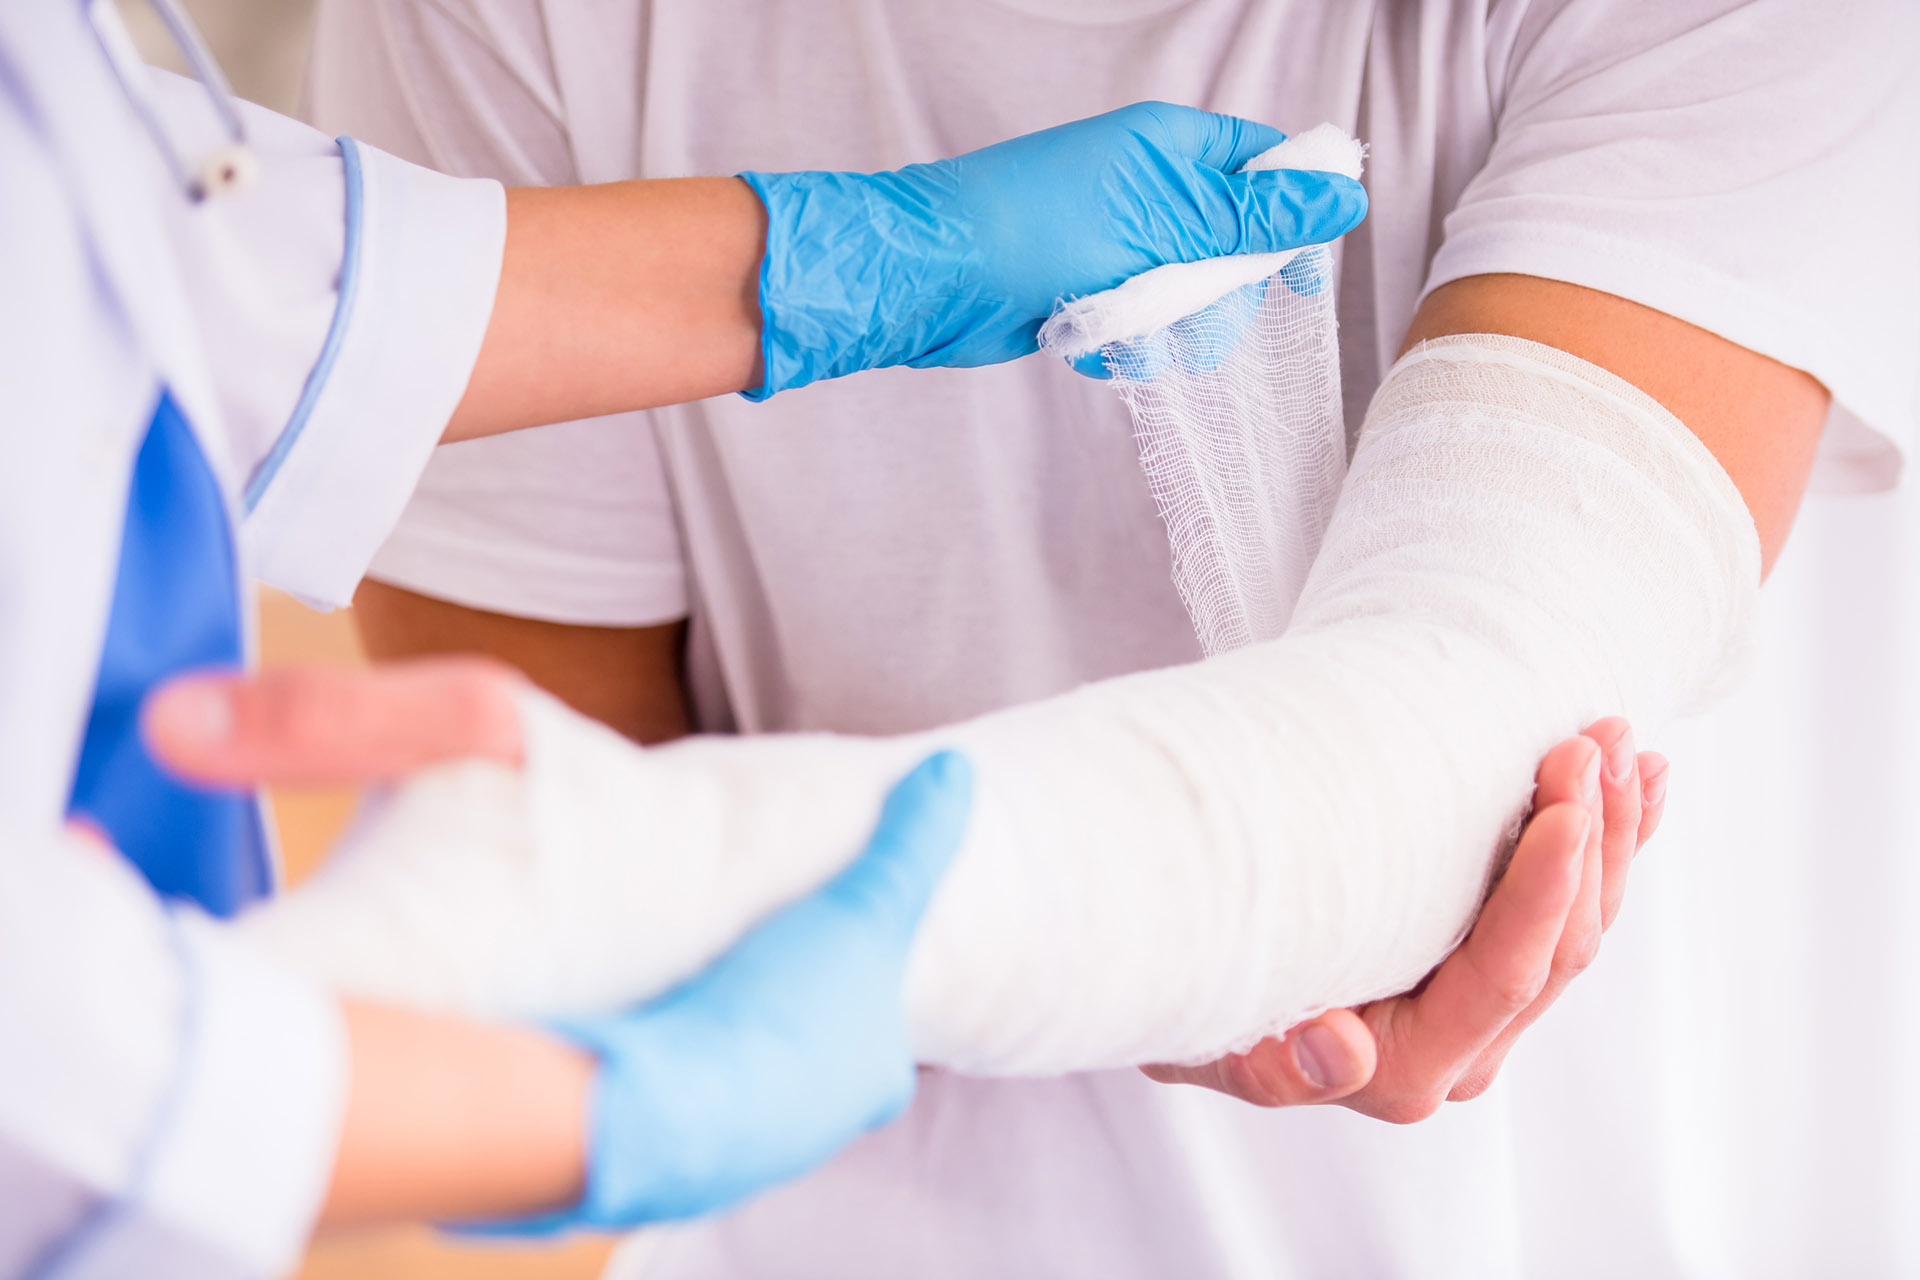 AVERAGE SETTLEMENT FOR A BROKEN BONE IN A CAR ACCIDENT